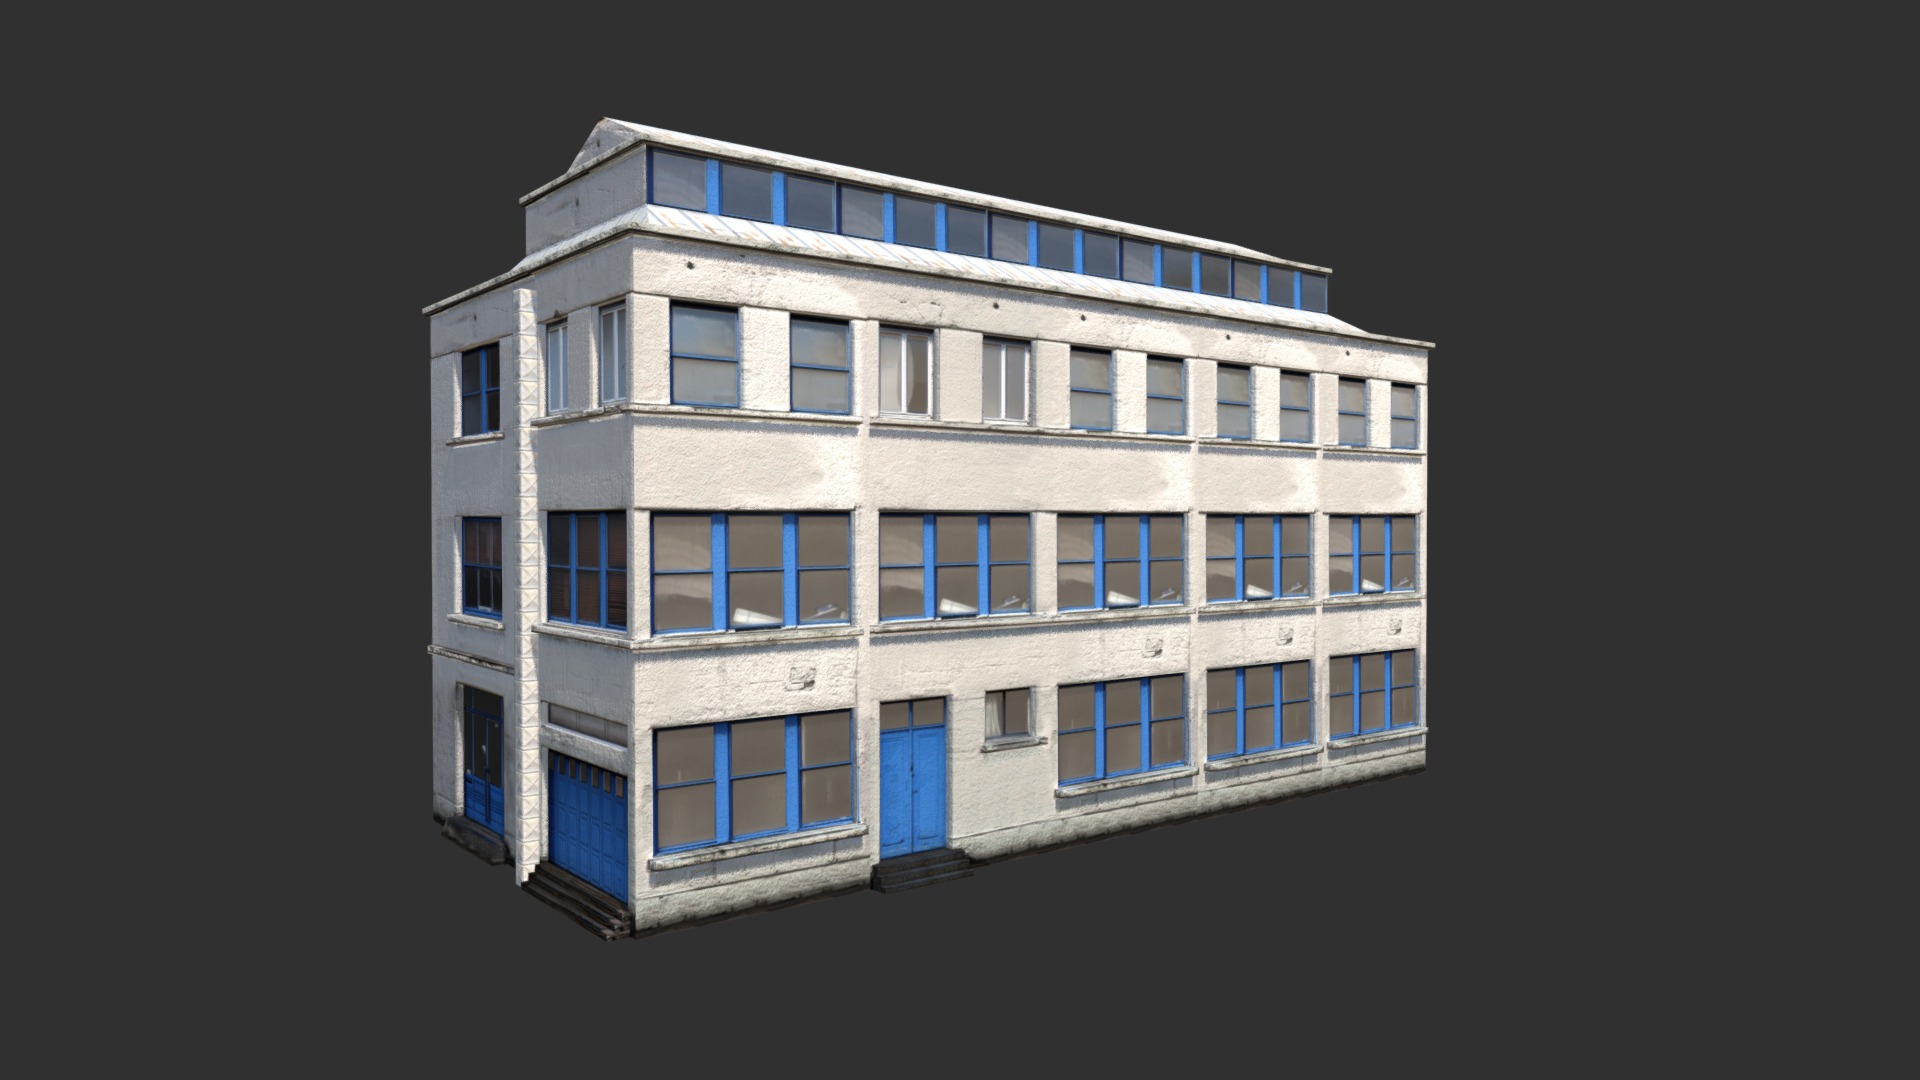 3D model Apartment House #93 Low Poly 3d Model - This is a 3D model of the Apartment House #93 Low Poly 3d Model. The 3D model is about a building with many windows.